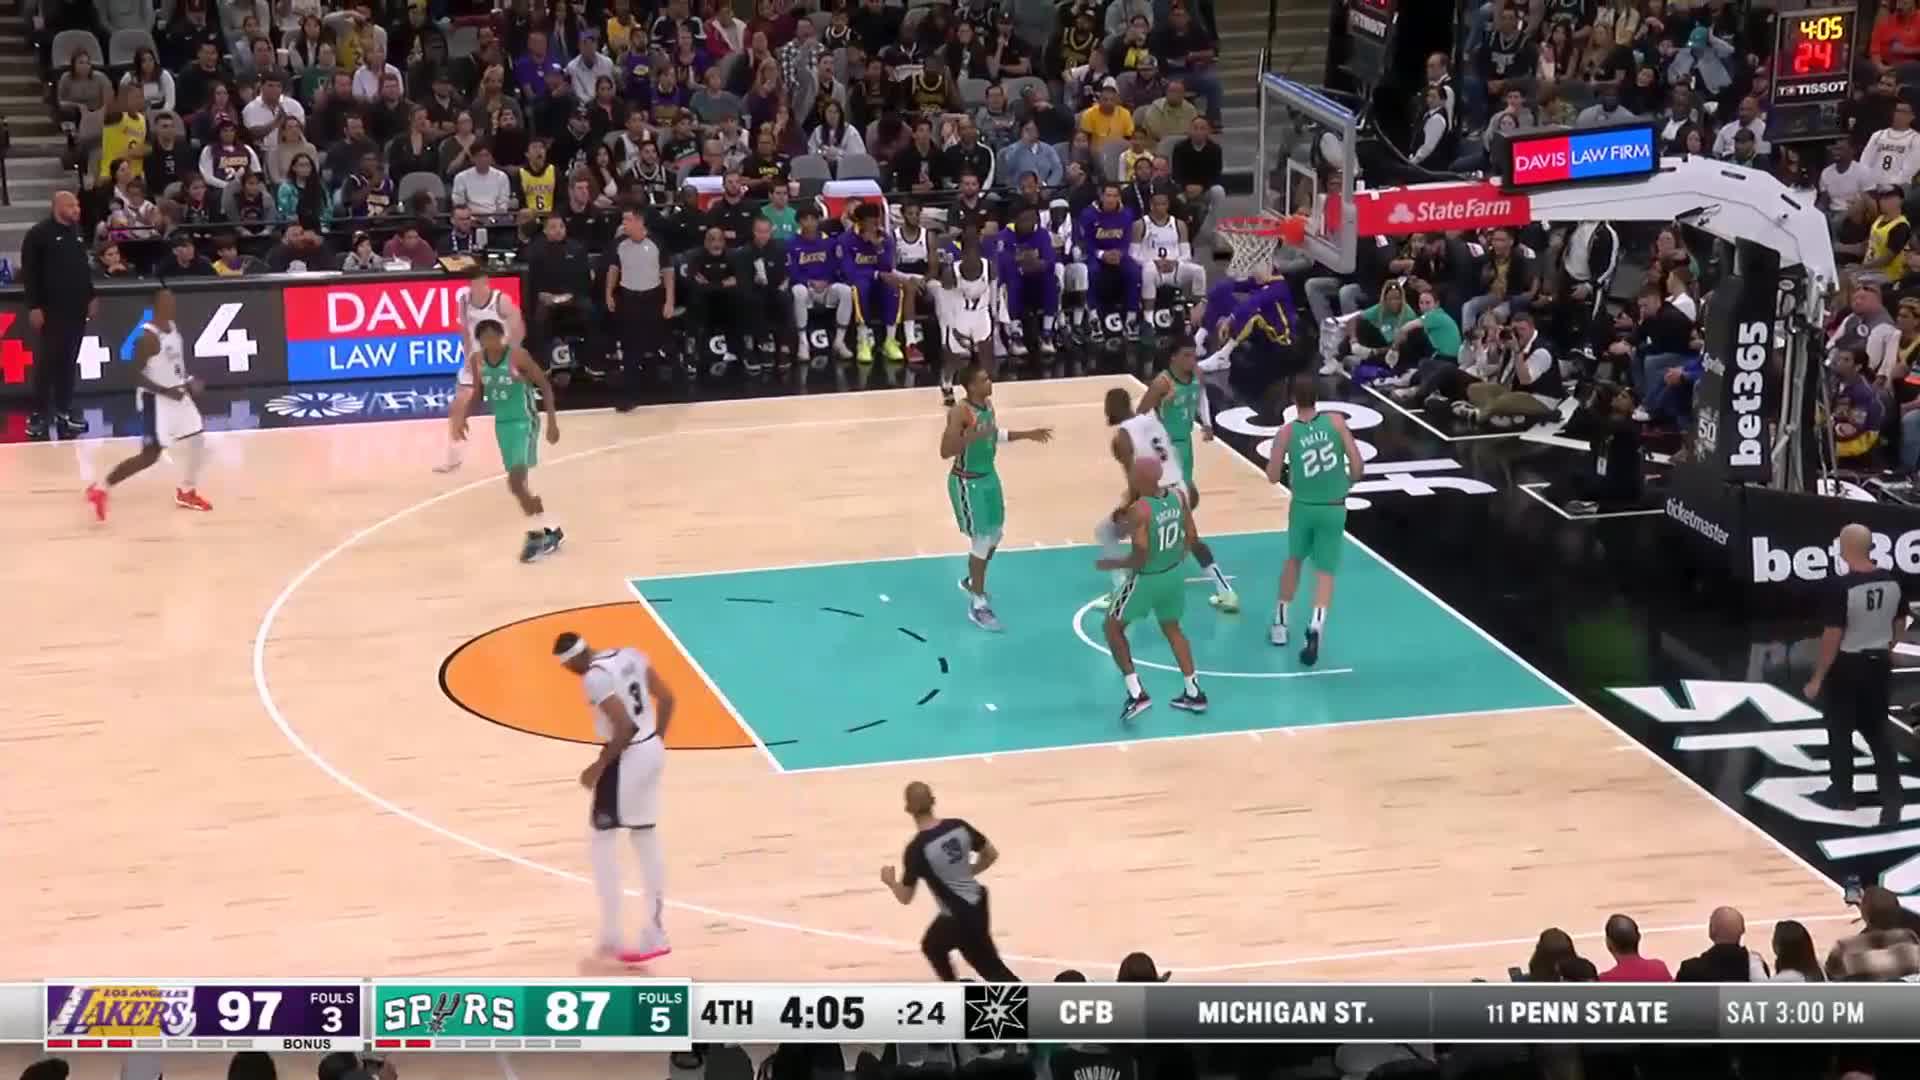 LeBron James with the flush